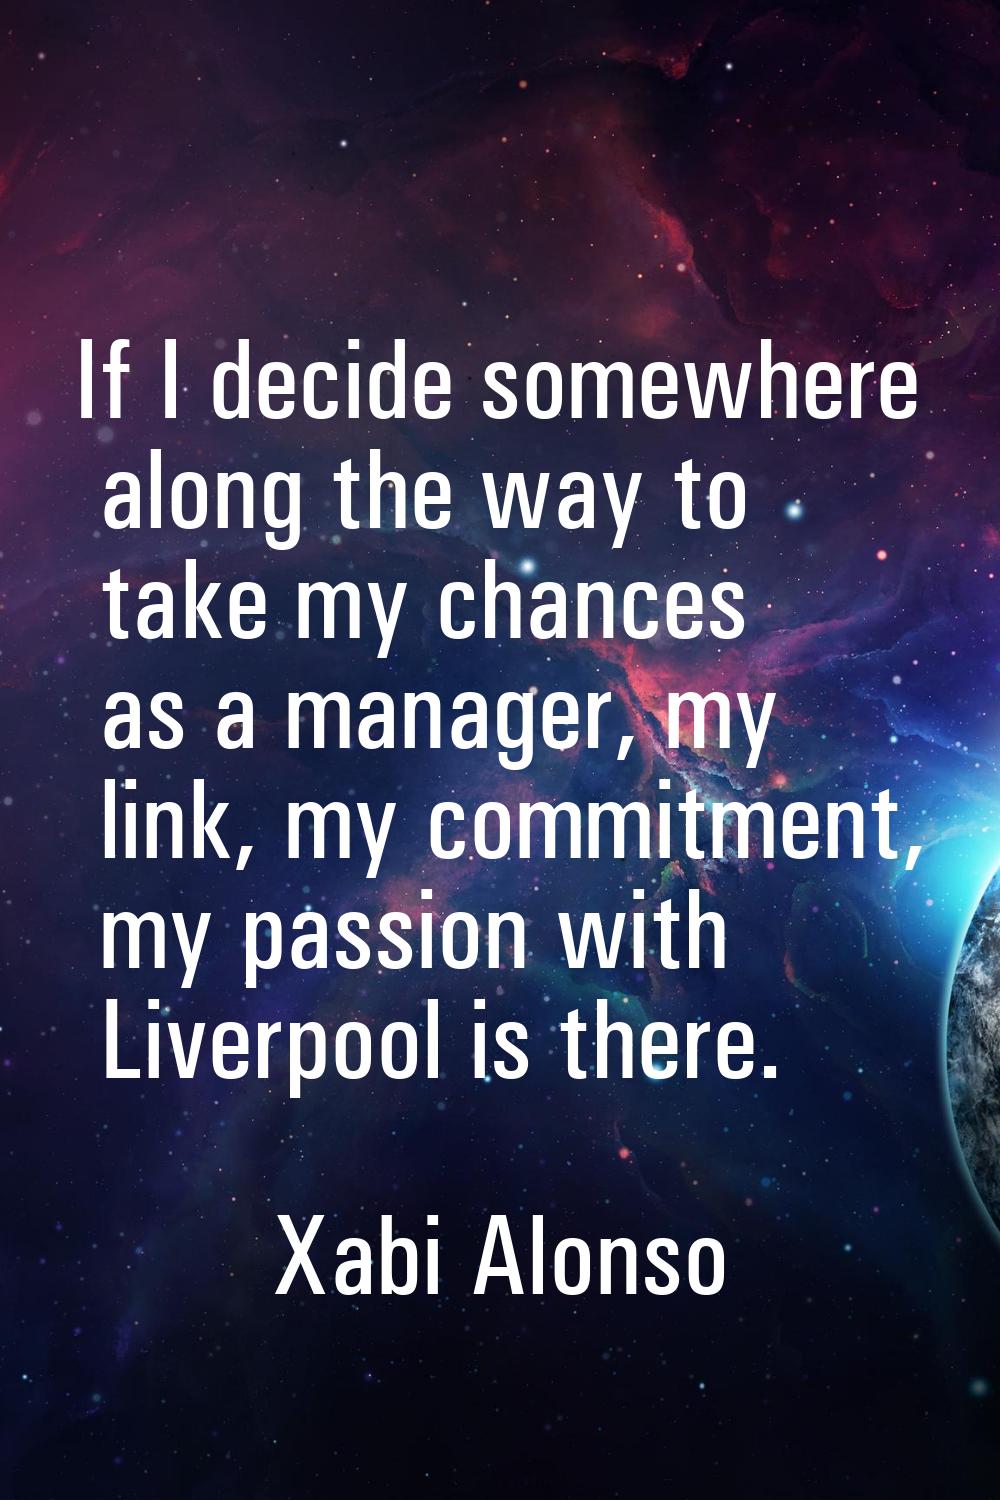 If I decide somewhere along the way to take my chances as a manager, my link, my commitment, my pas